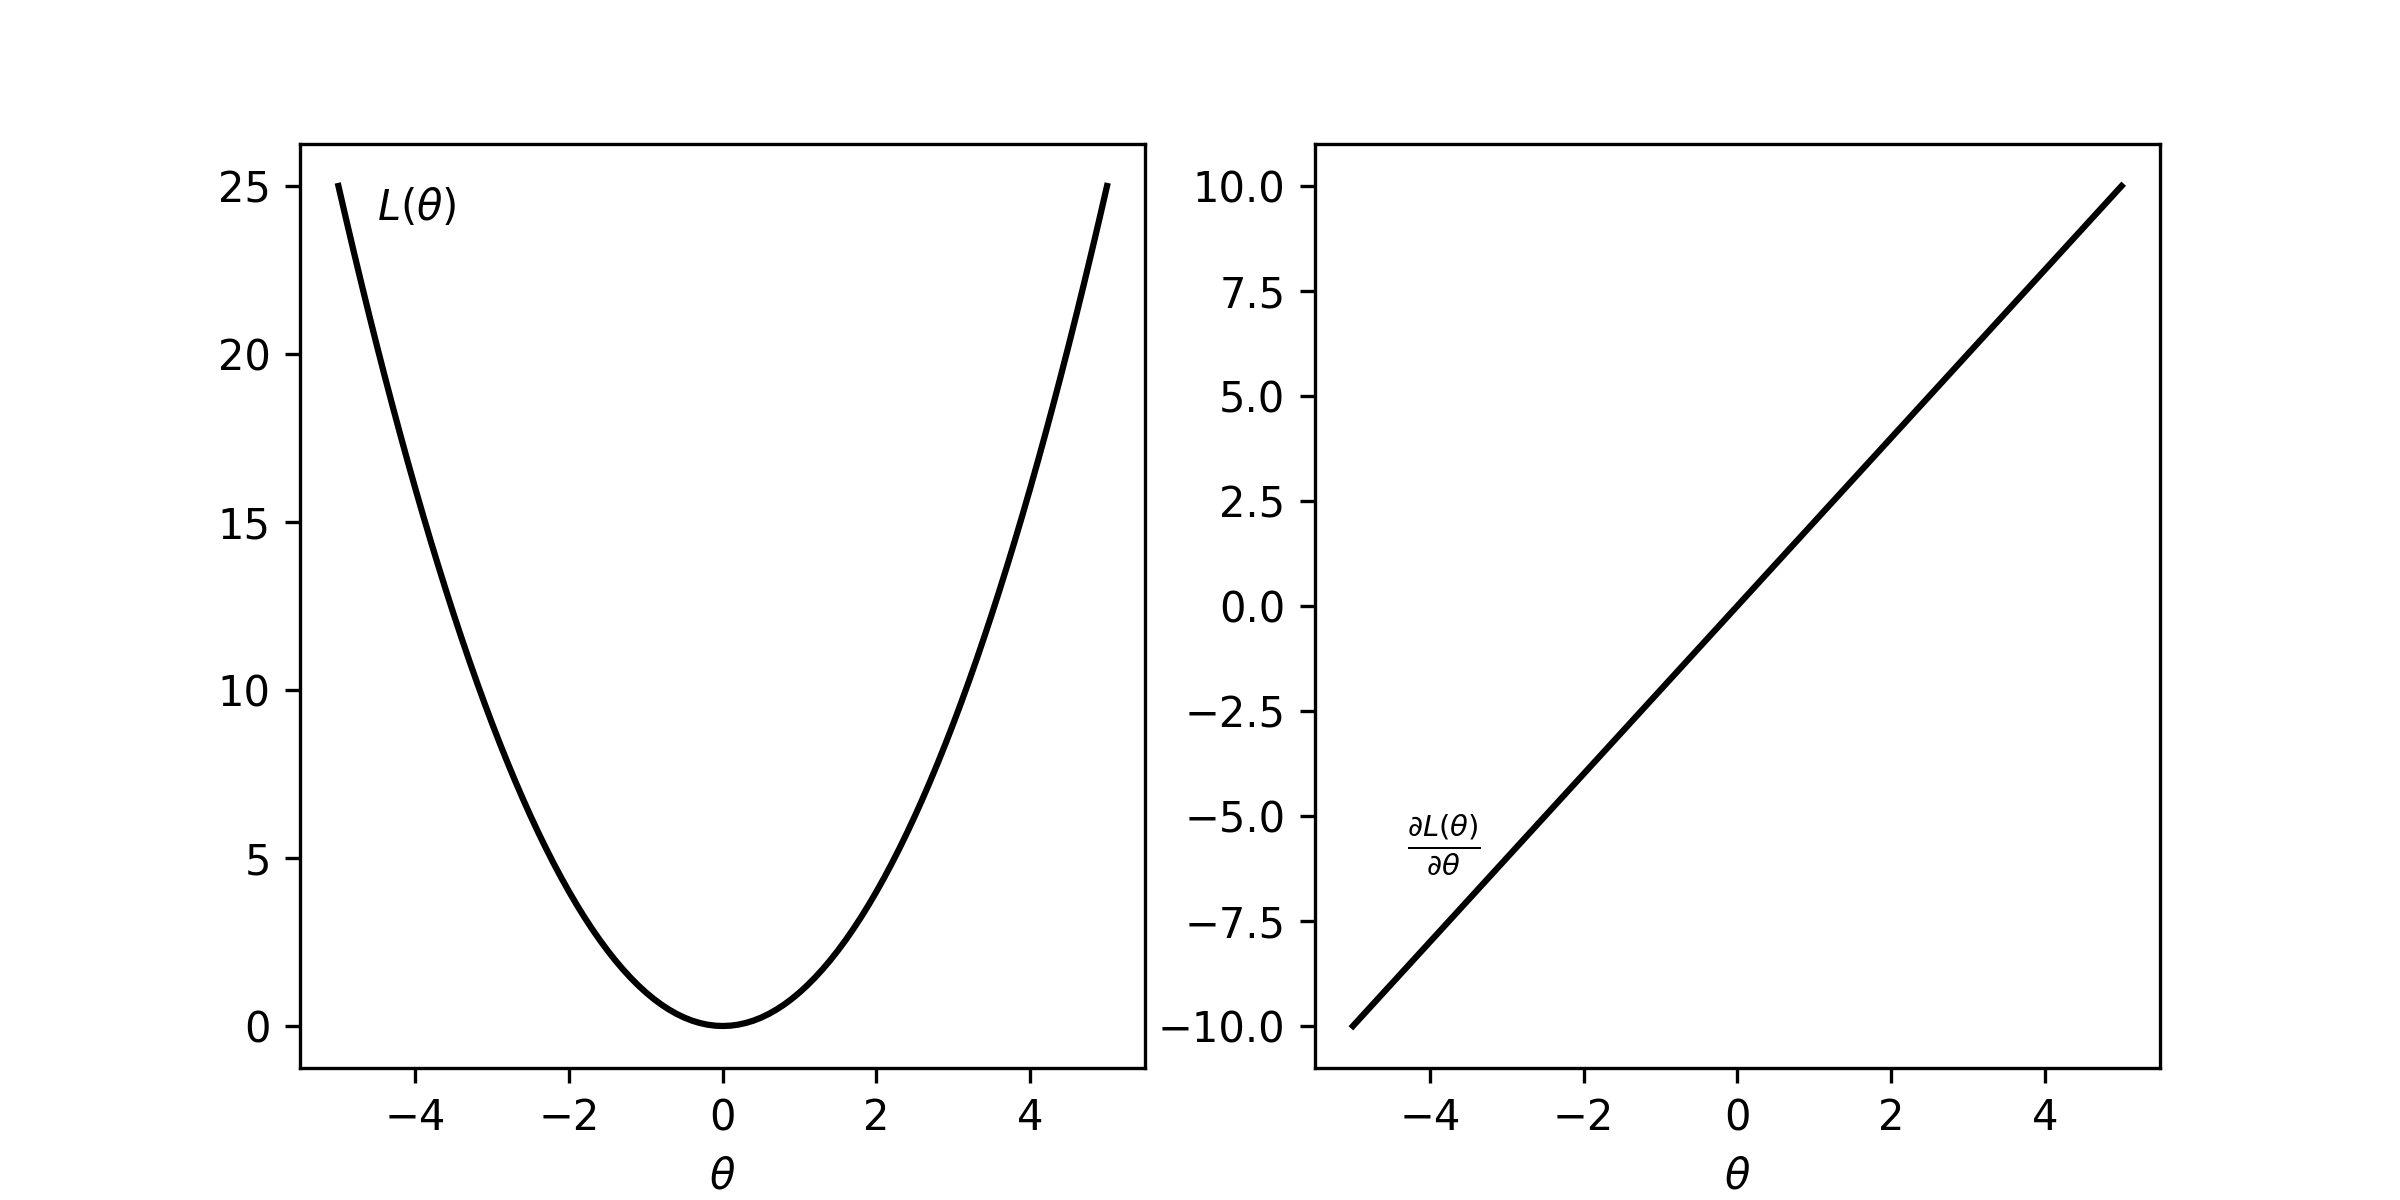 Derivative and loss function for the mean squared error loss function